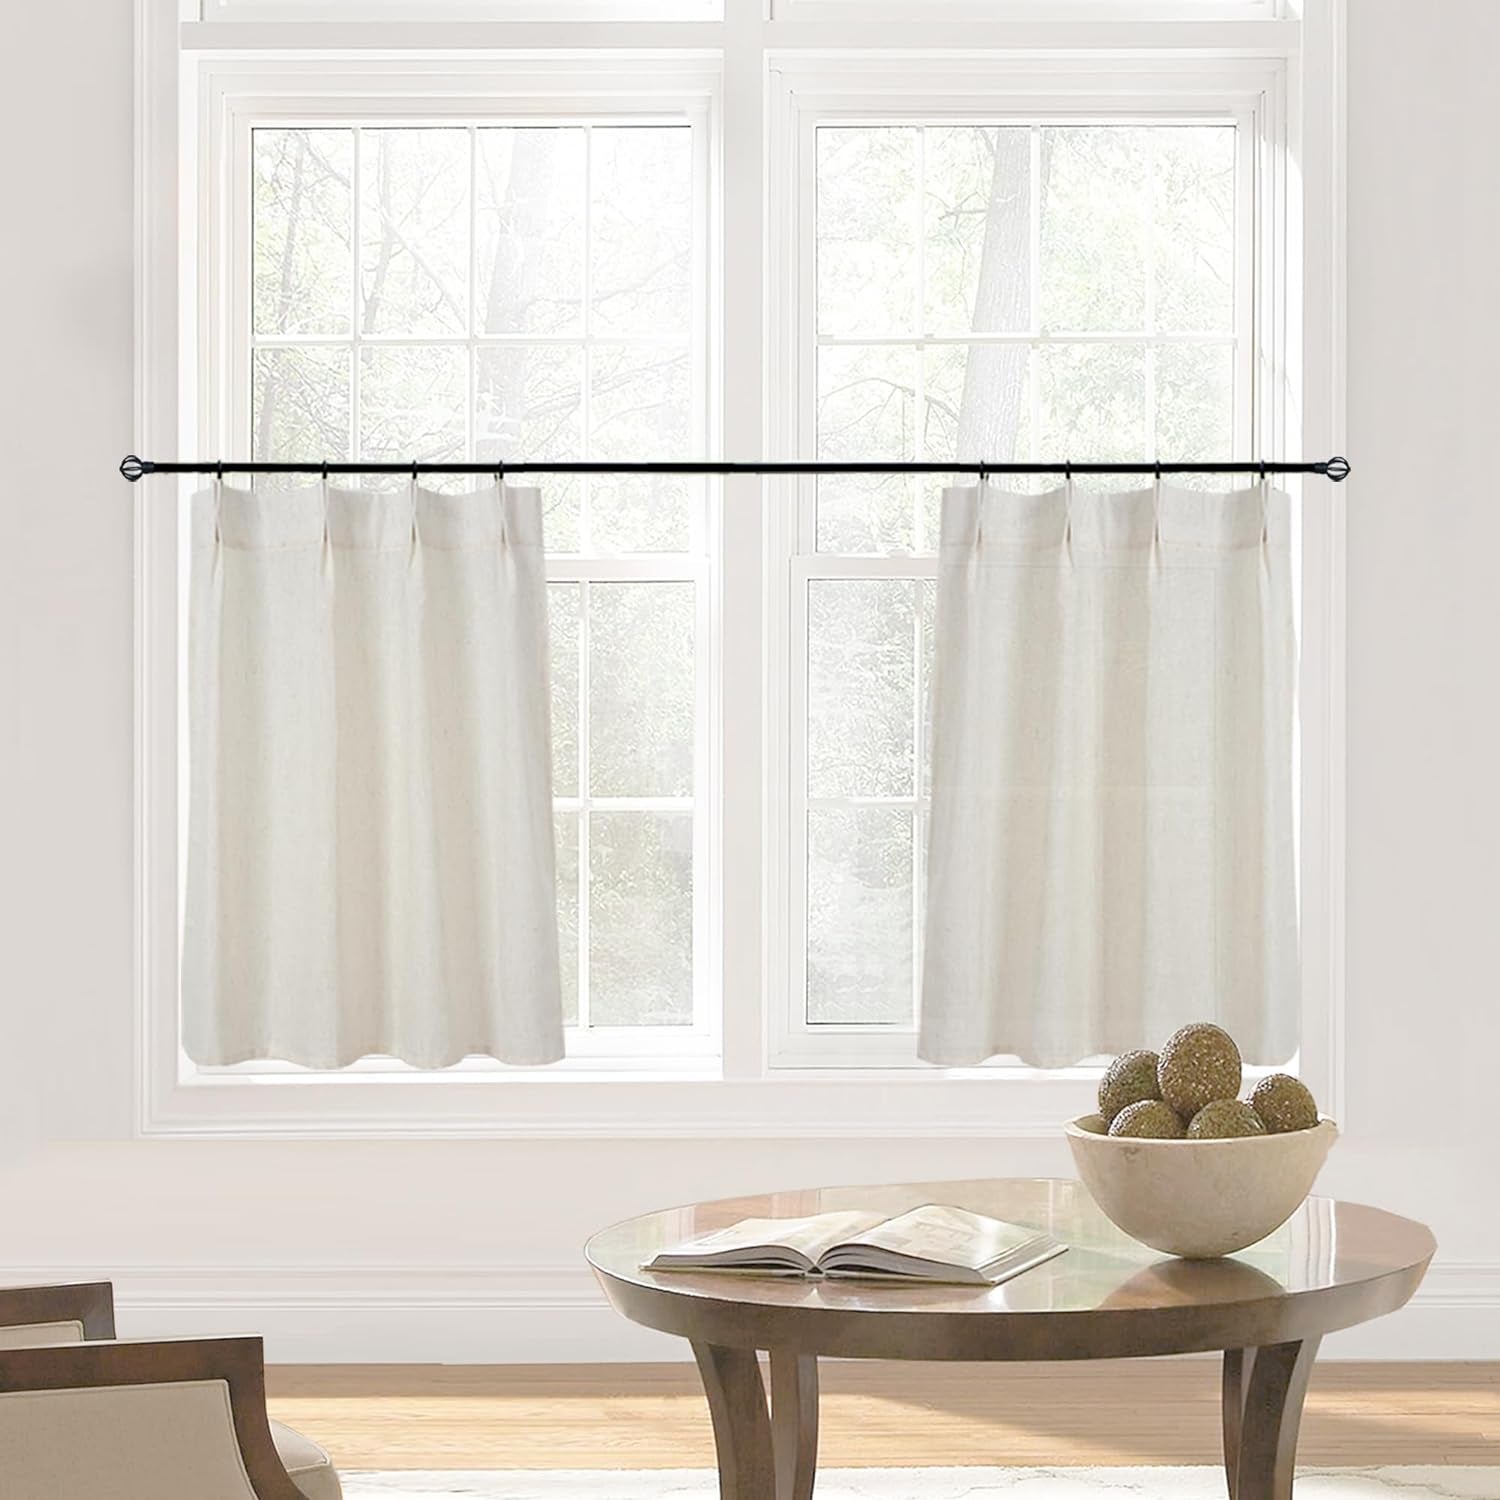 Short Curtains for Windows,Semi Sheer White Linen Cotton Privacy Light Filtering Cafe Length Small Pinch Pleated Curtains for Living Room Bathroom with Hooks,24 X 24 Inch Long  Lino Rosa Natural 24"W X 24"L 